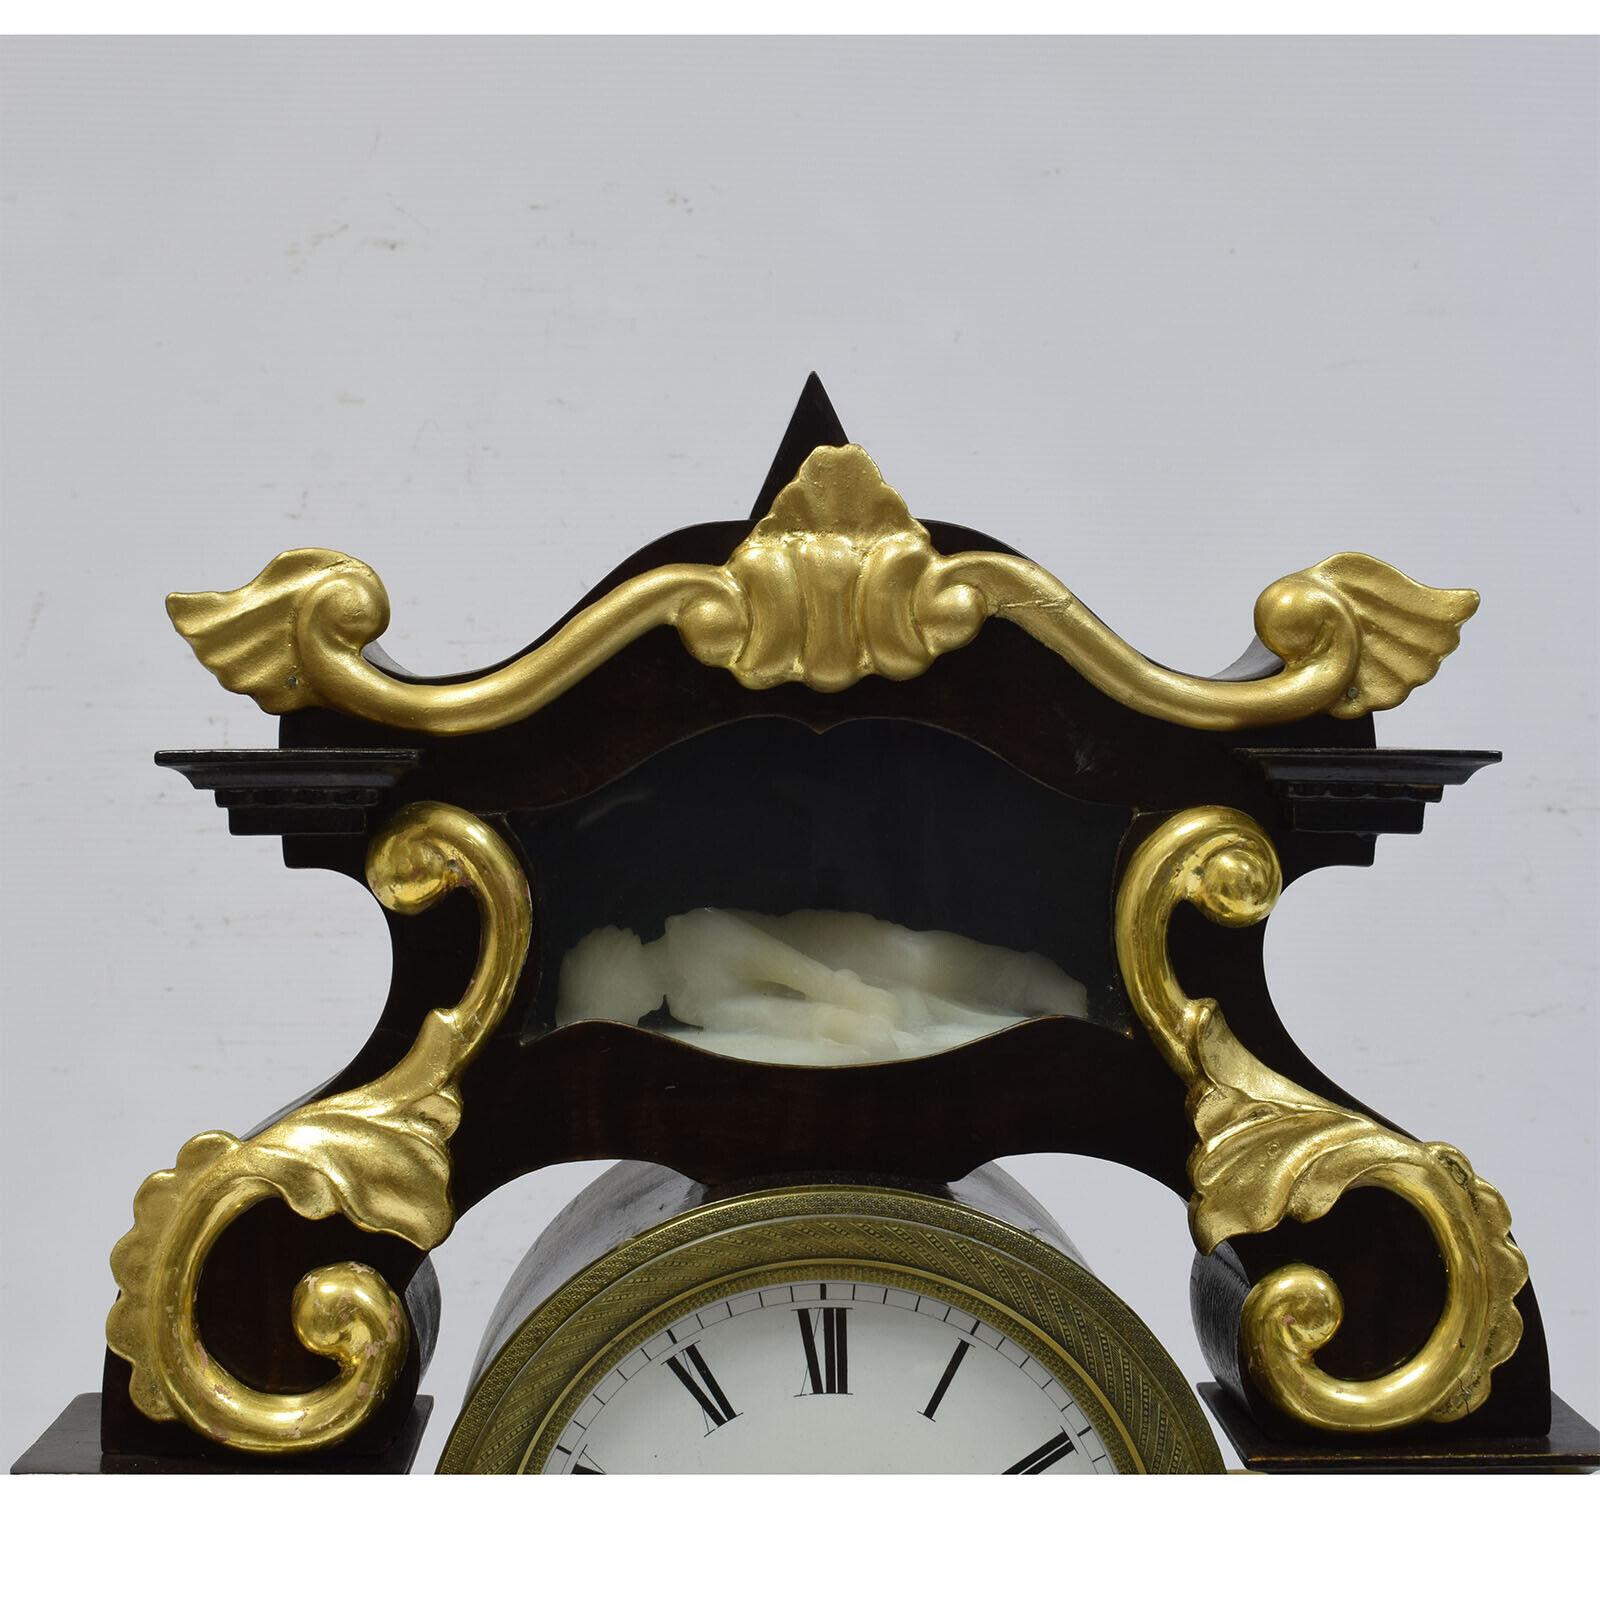 19th Century Functional Column Clock, Antique Mantel Clock with Portico, 1G03 For Sale 1